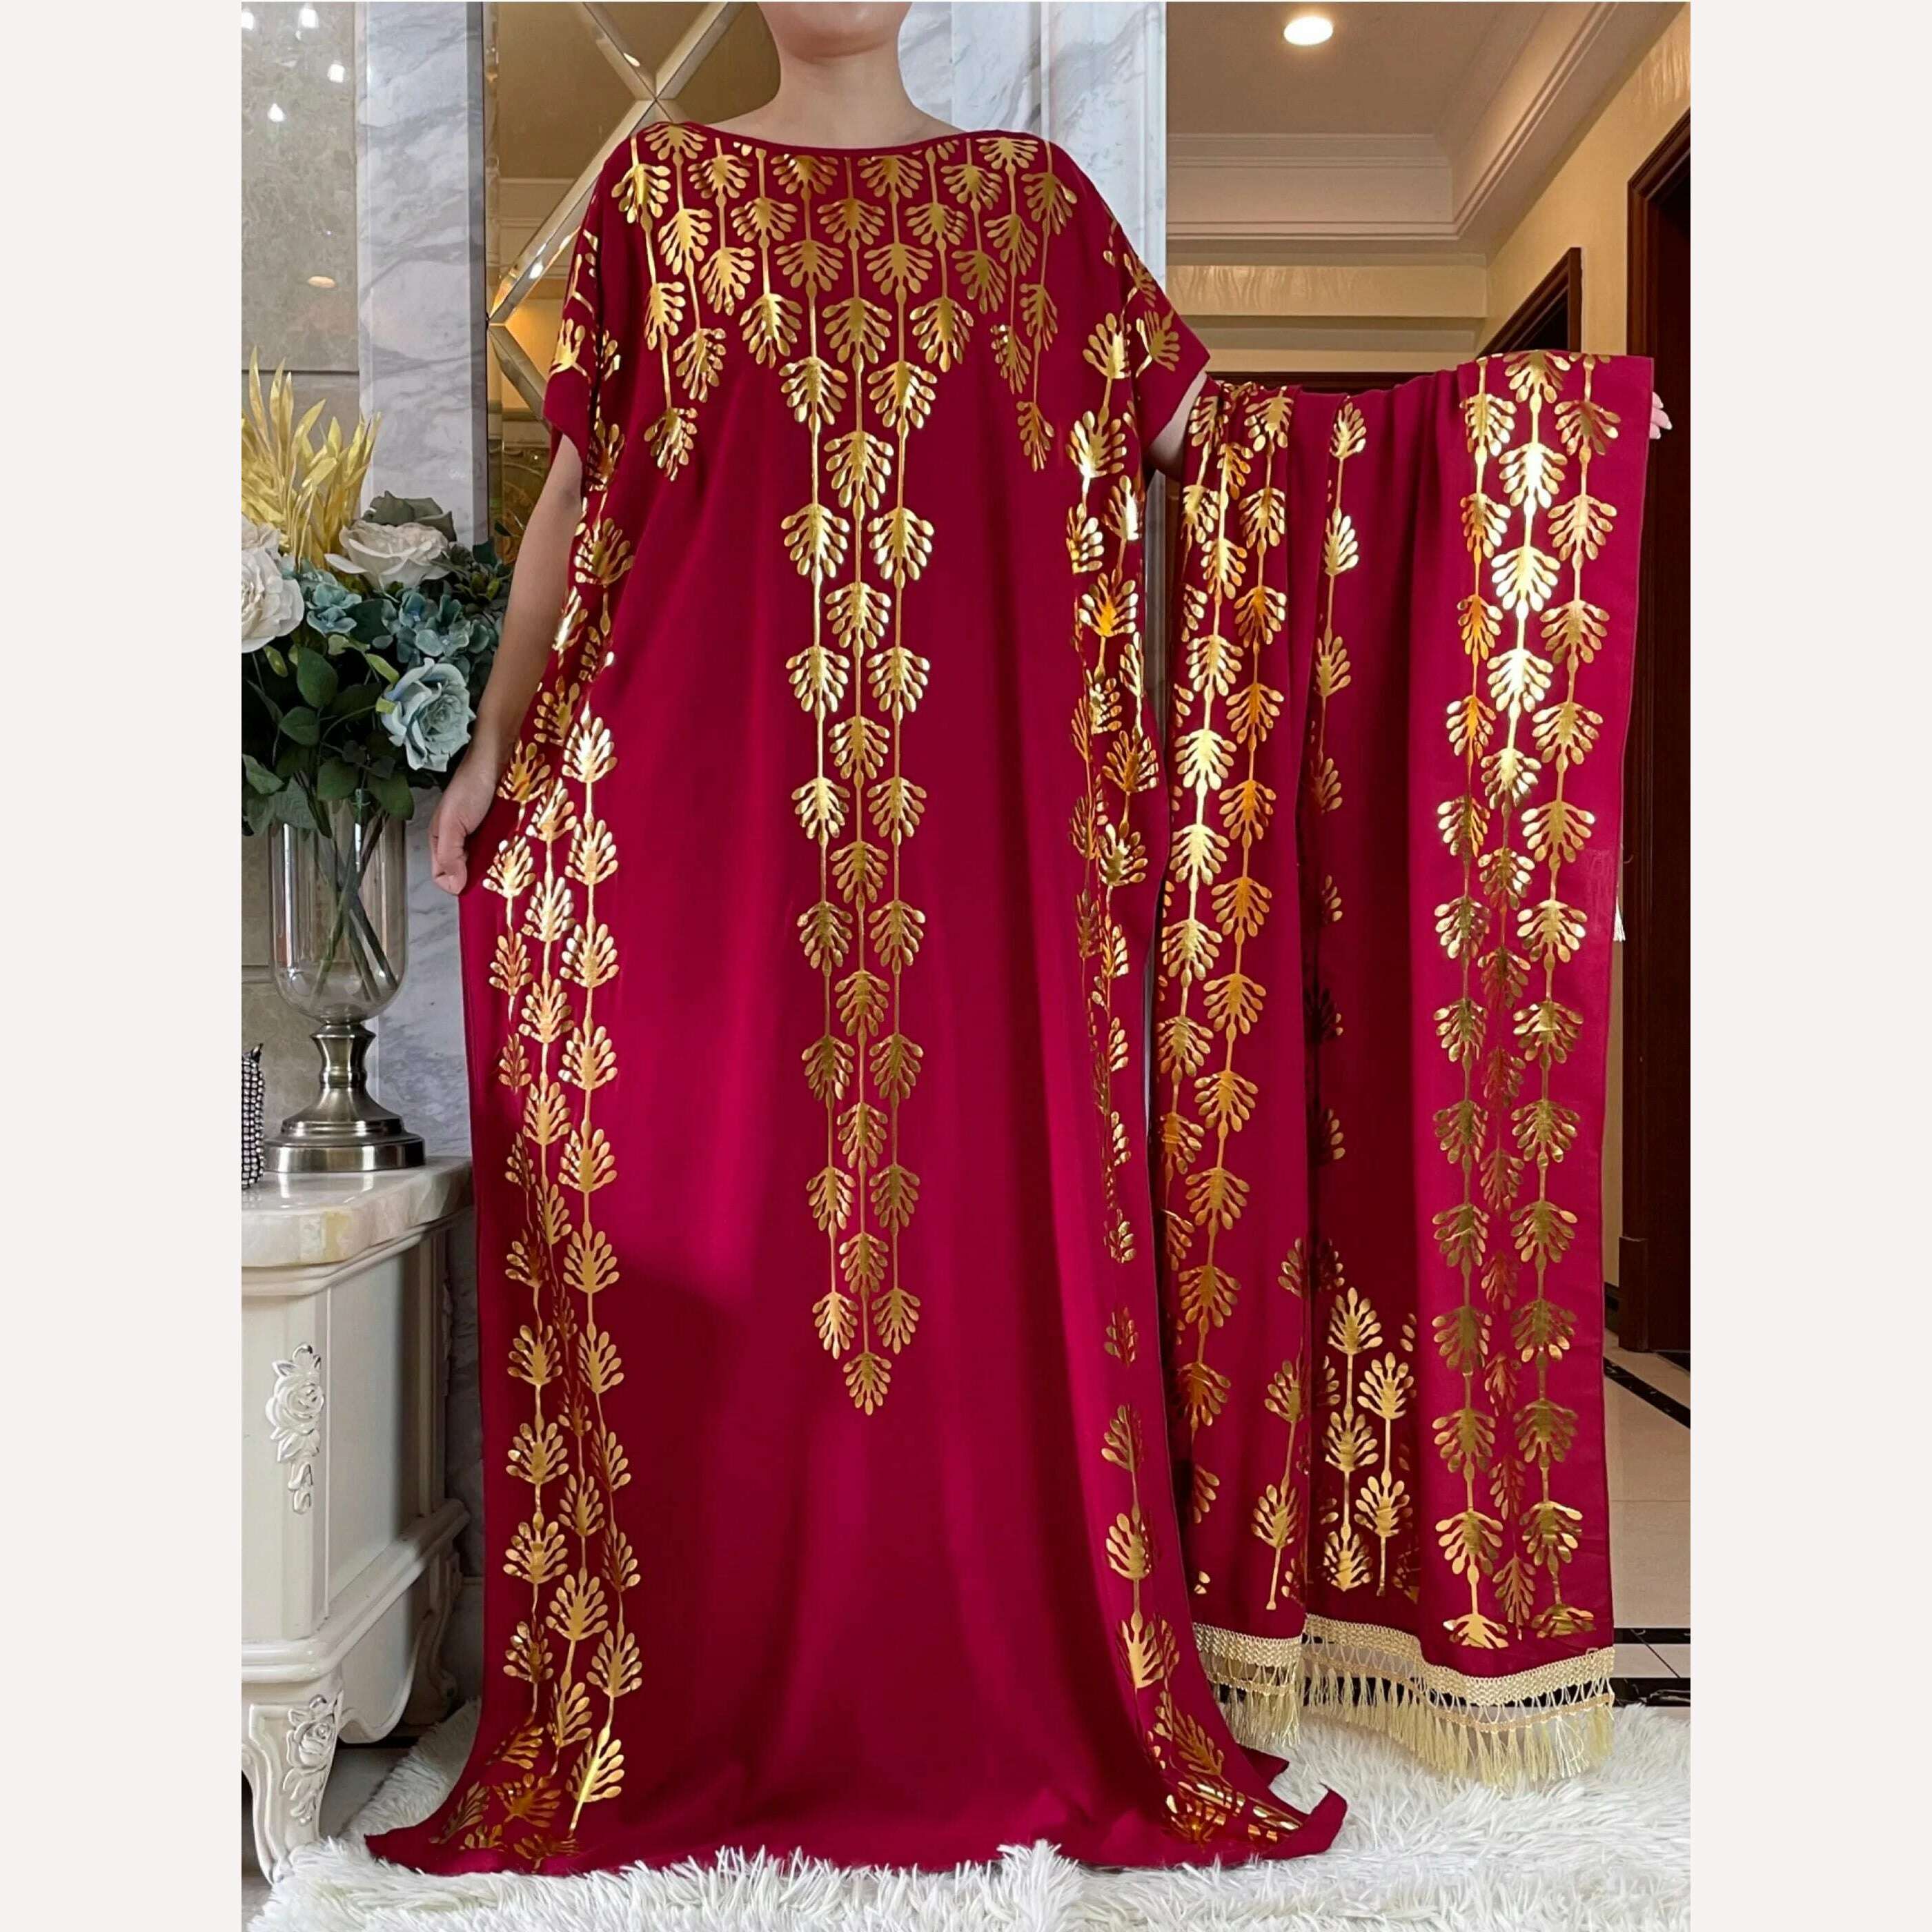 KIMLUD, Dubai New Abaya For Women  Summer Short Sleeve Cotton Dress Gold Stamping Loose Lady Maxi Islam African Dress With Big Scarf, HB438-5 / One Size, KIMLUD Womens Clothes